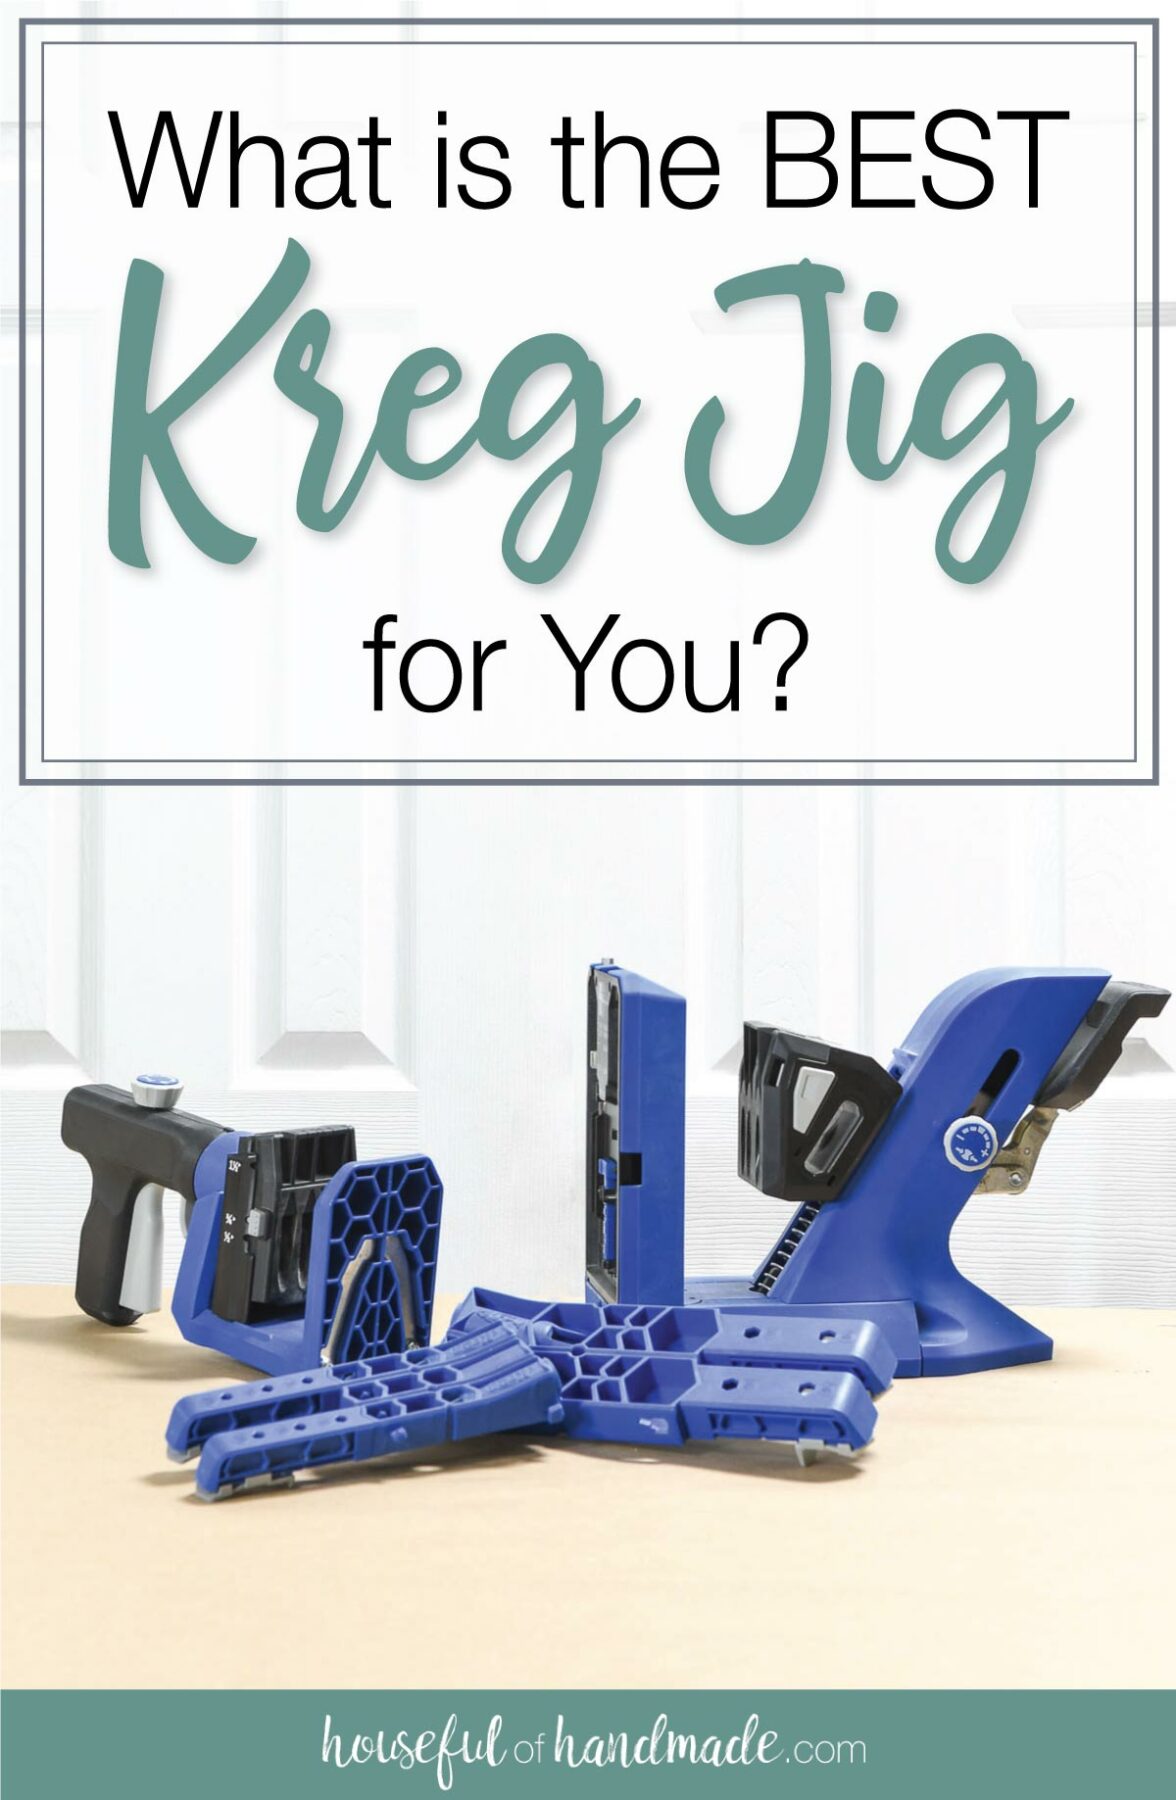 Four different Kreg pocket hole jigs on a table with words "What is the best Kreg Jig for You?" above them. 